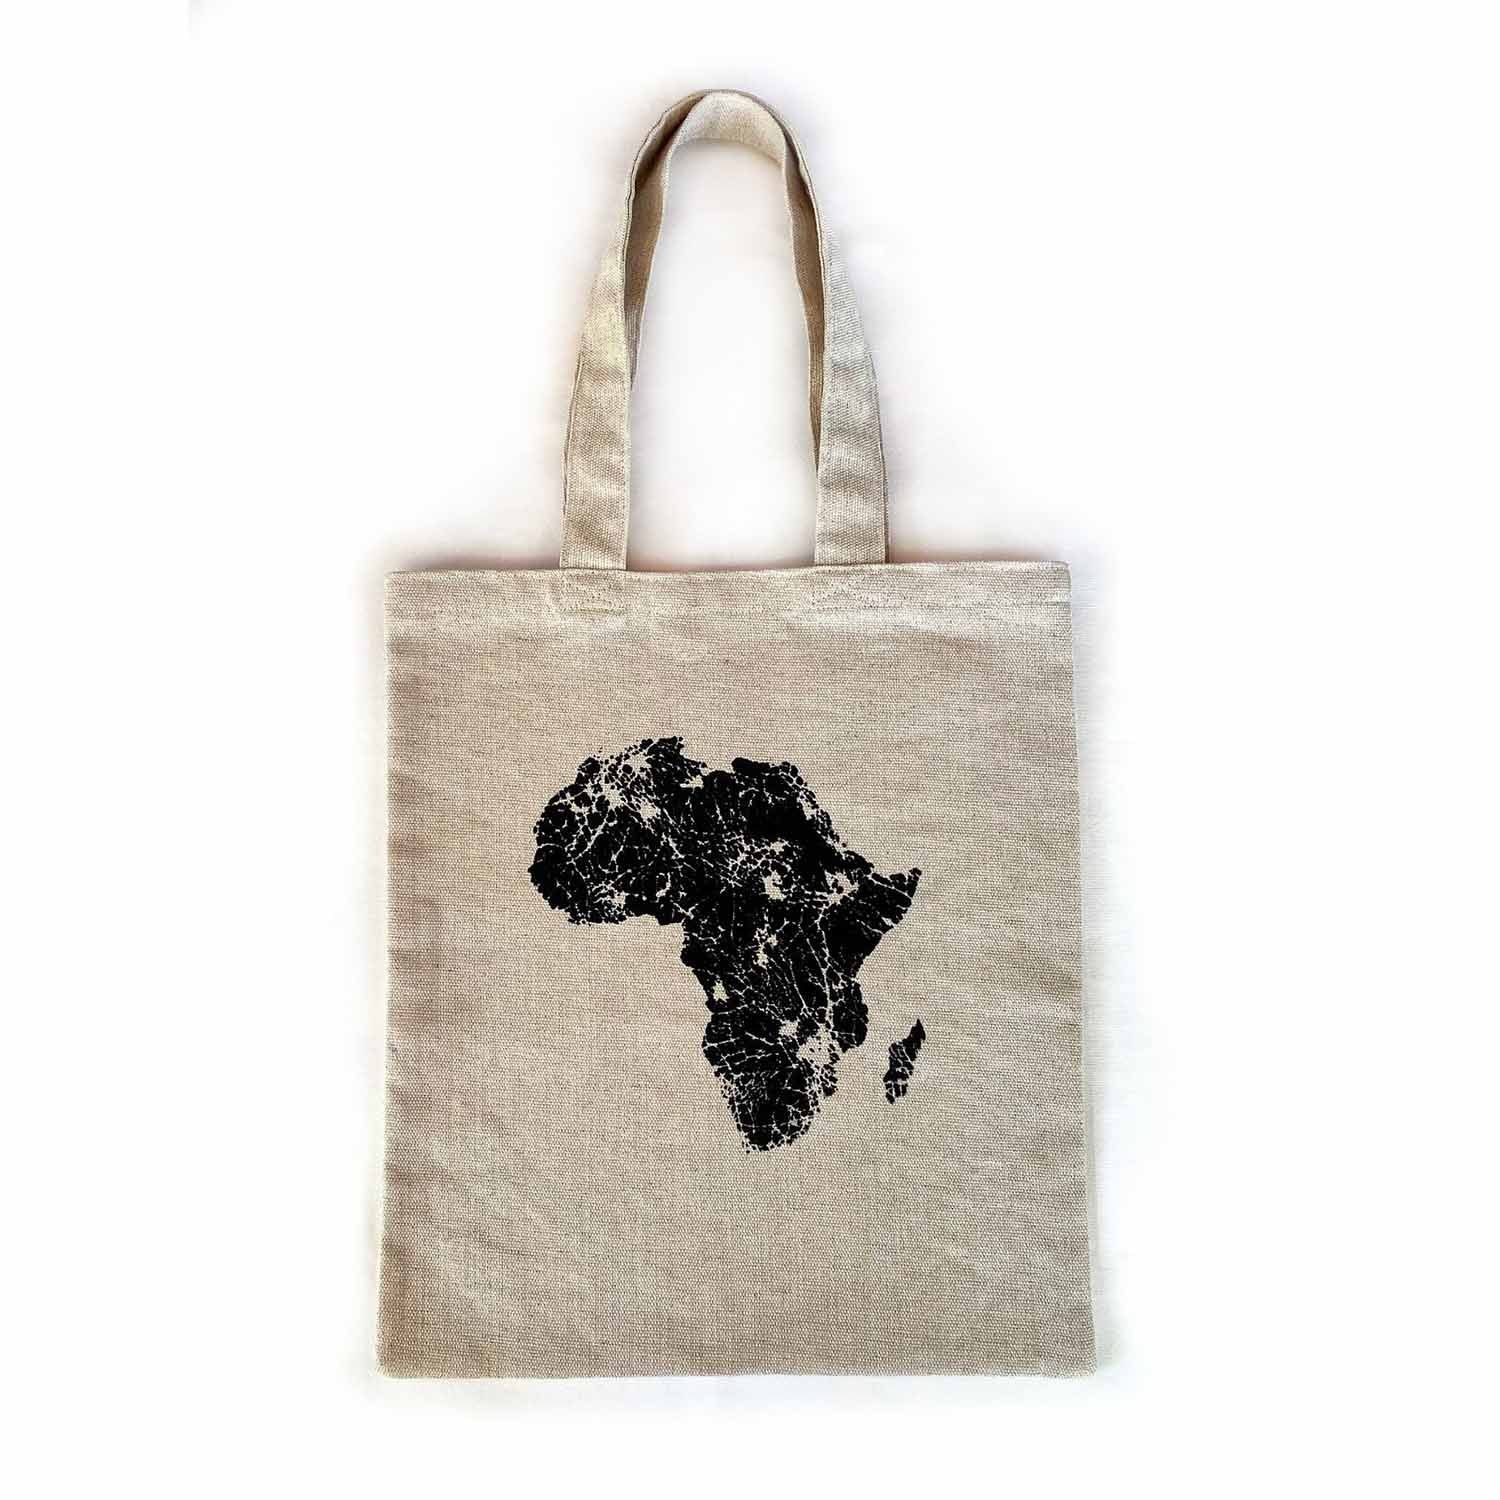 Africa Tote Bag (Limited Edition) - The perfect African tote bag for your travels!